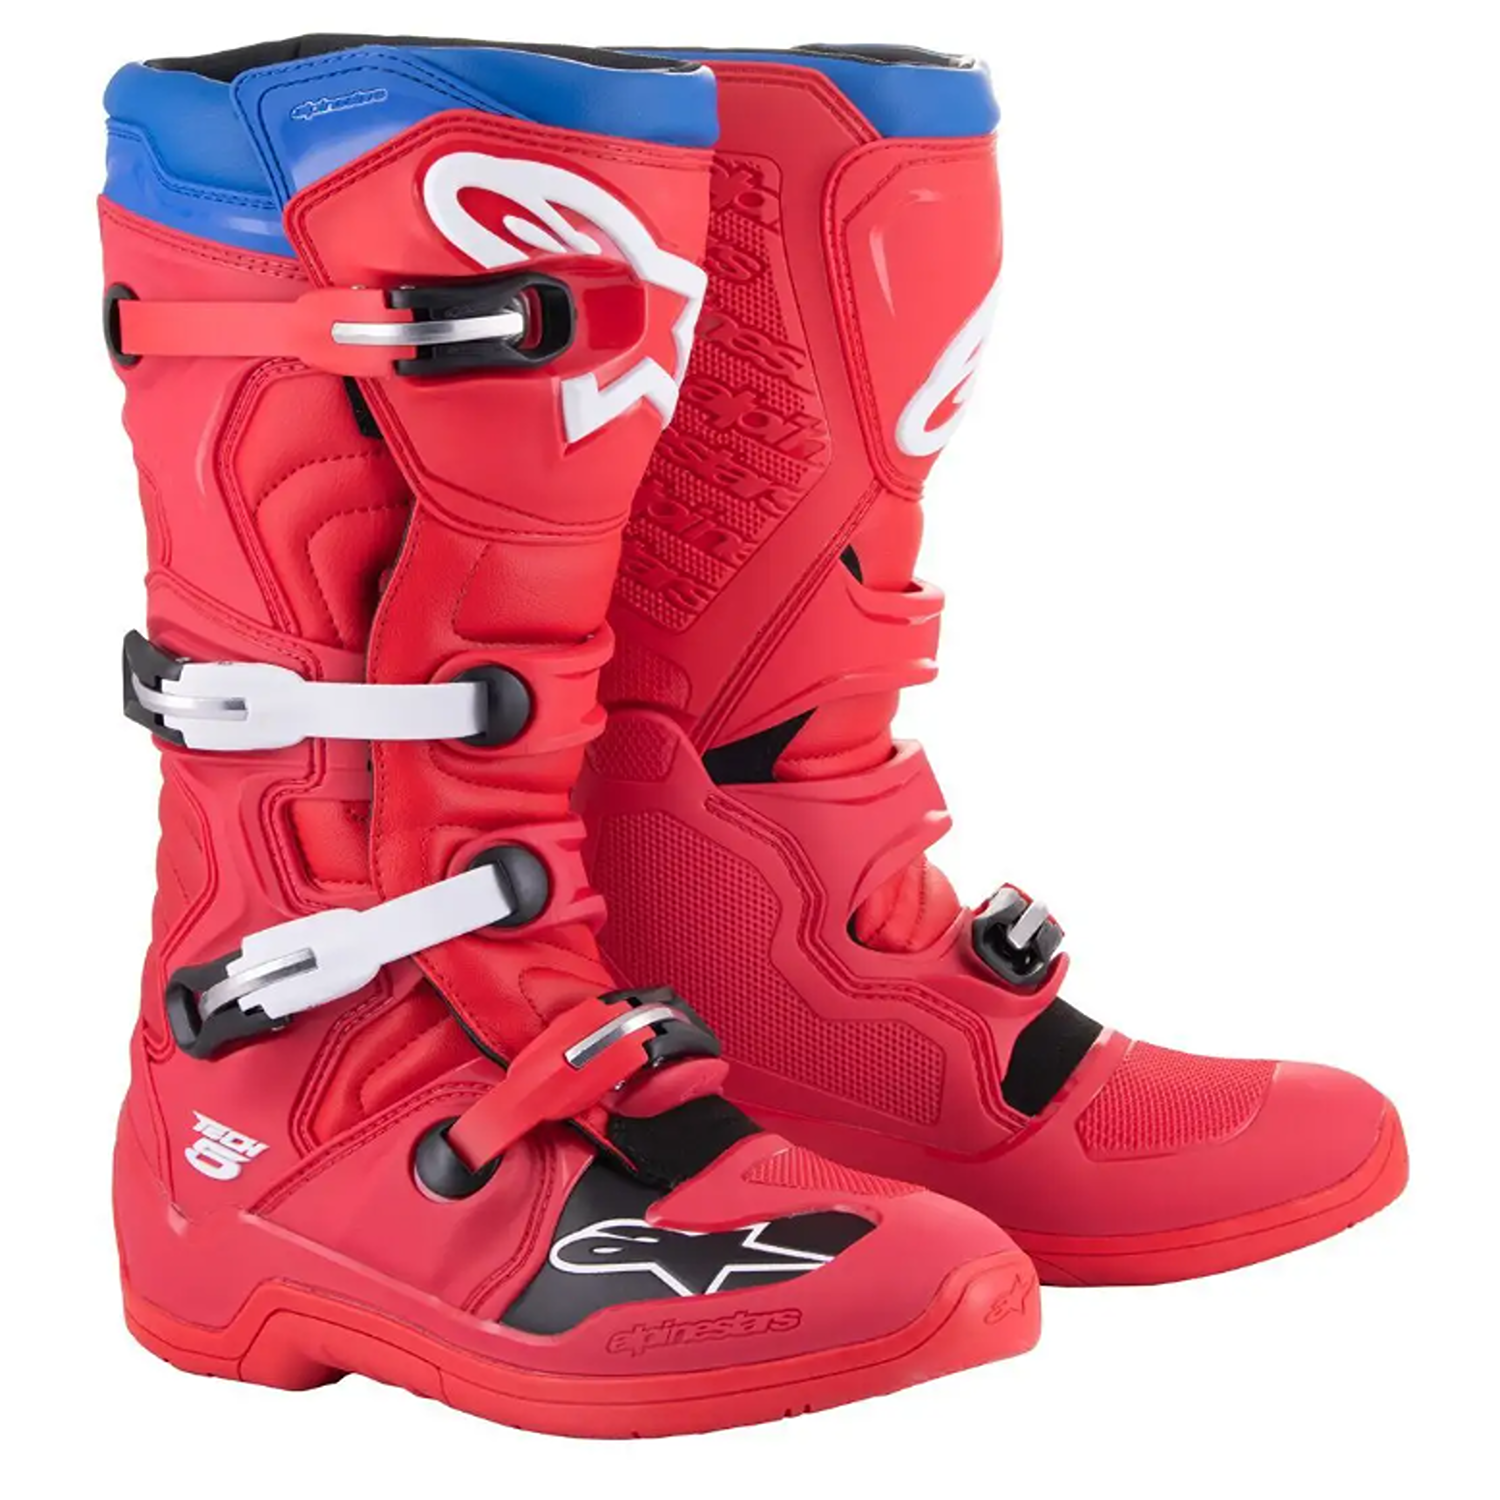 Image of Alpinestars Tech 5 Boots Bright Red Dark Red Blue Size US 10 ID 8059347199351